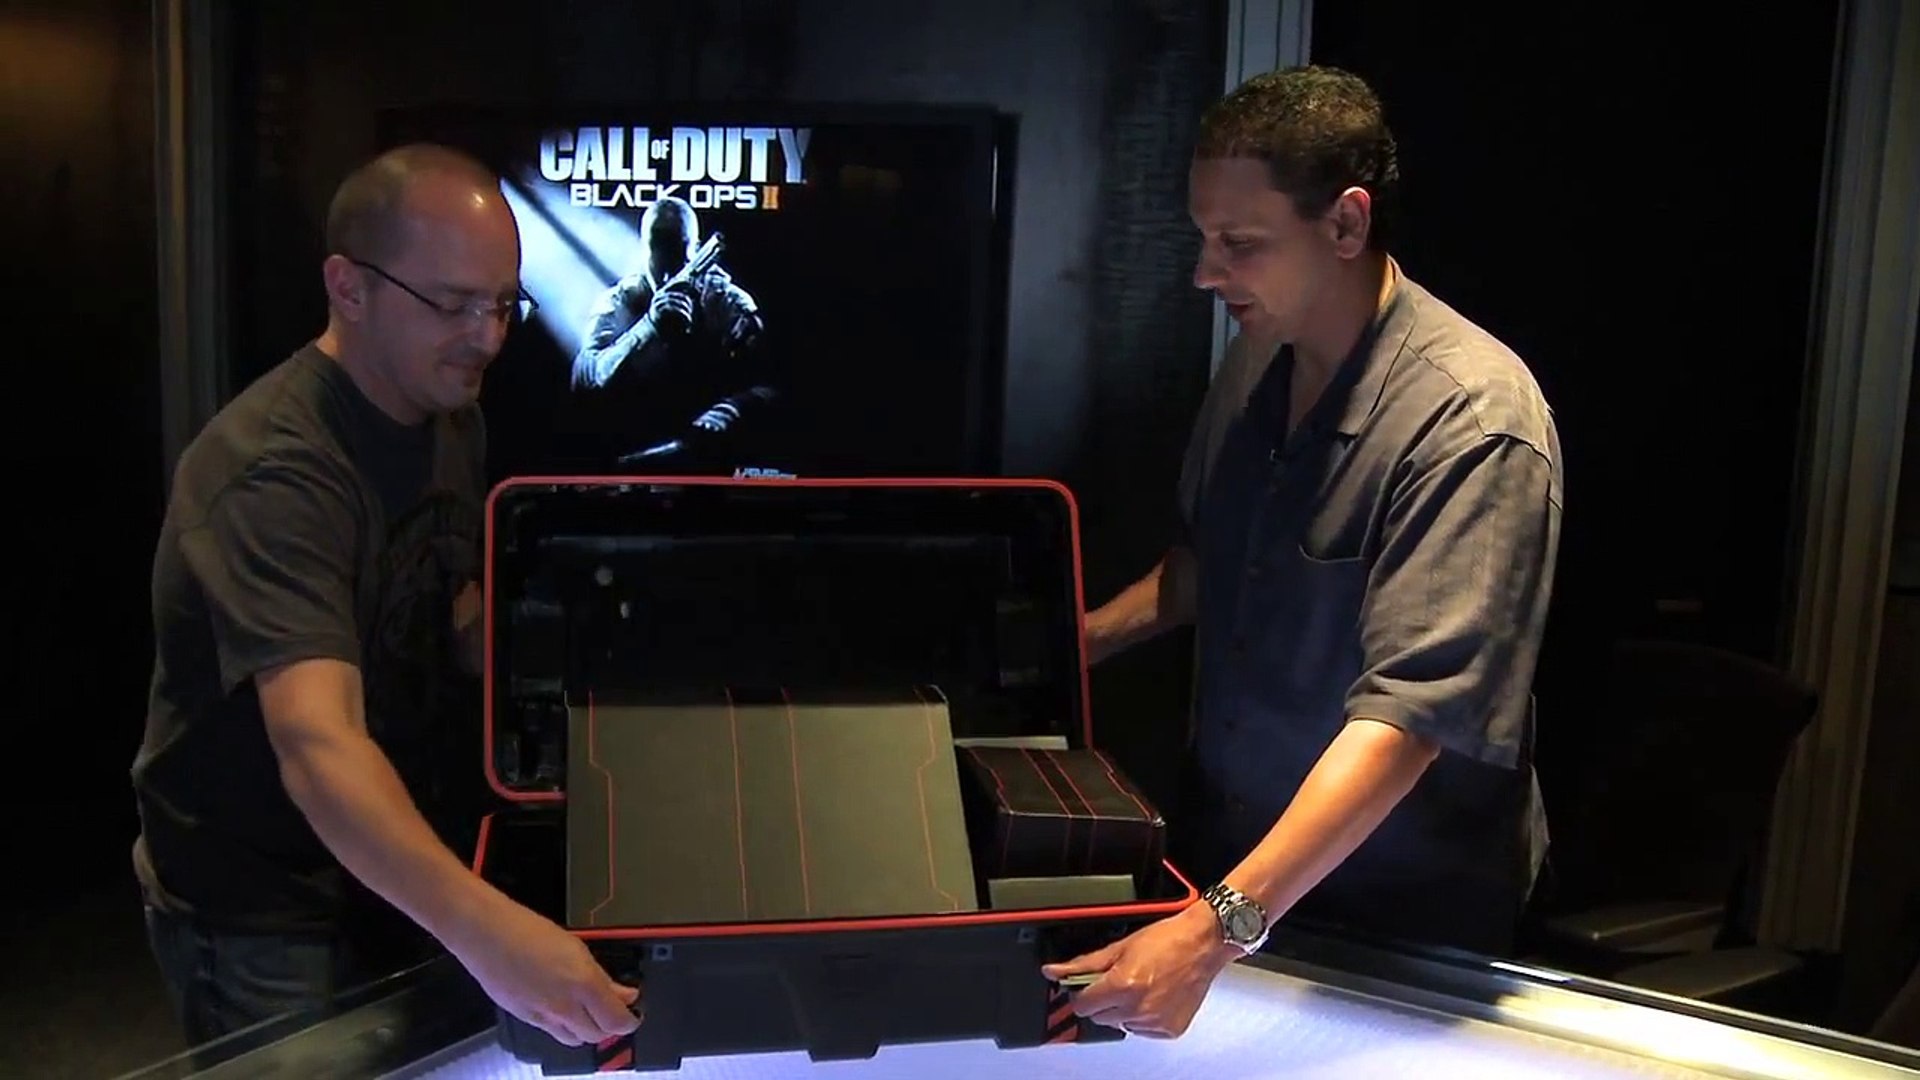 Reportage - Call of Duty: Black Ops 2 (Unboxing / Déballage Edition  Collector Drone) - Vidéo Dailymotion